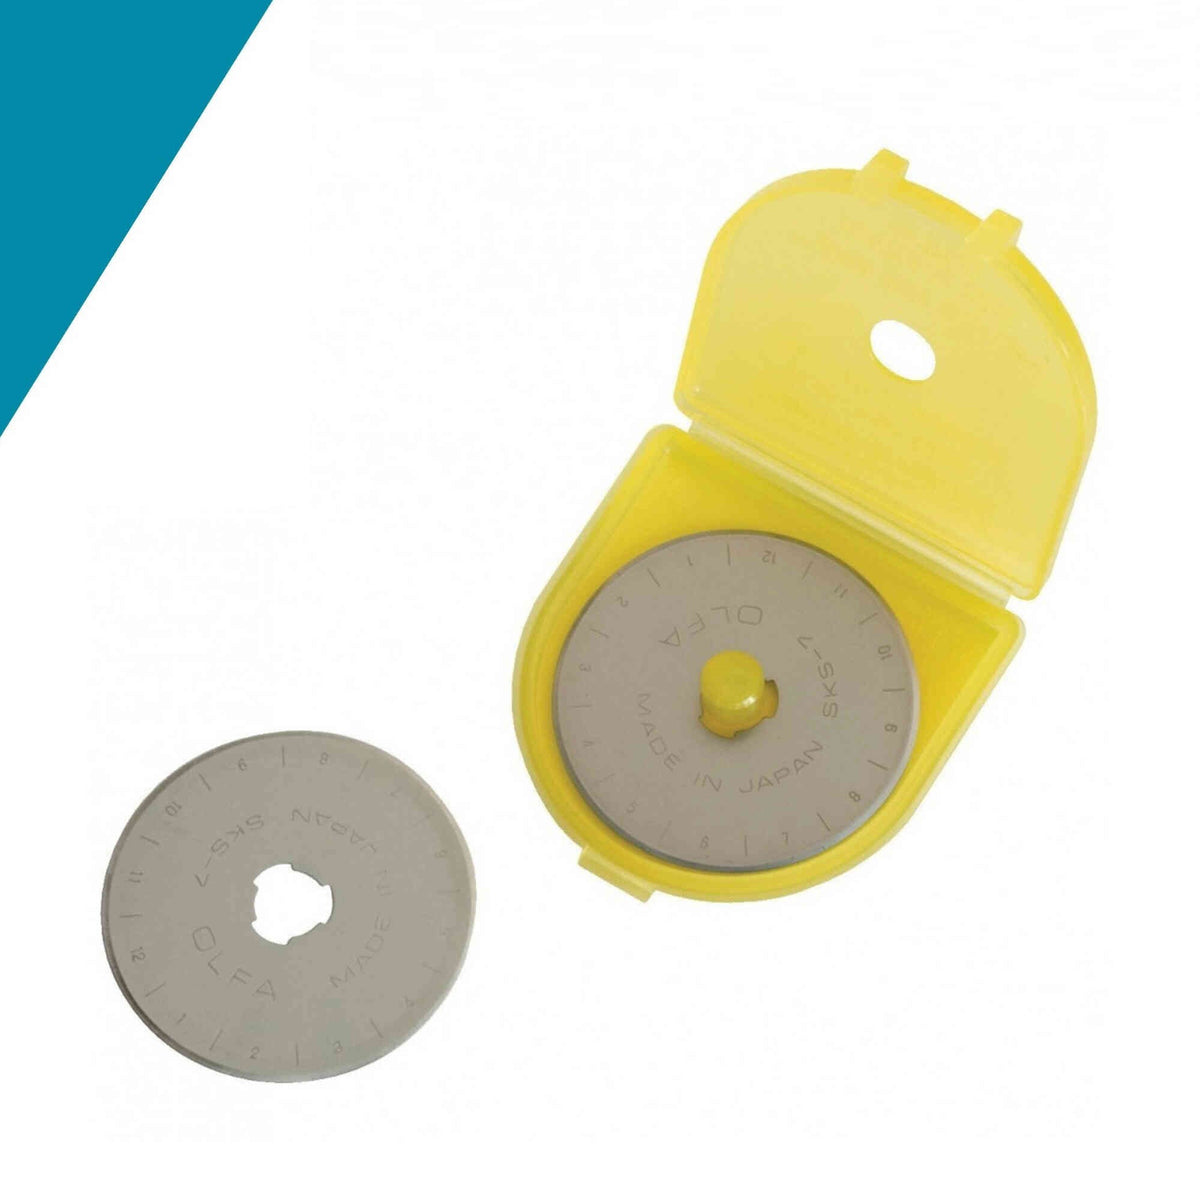 Rotary Cutter Blades - 5 Pack